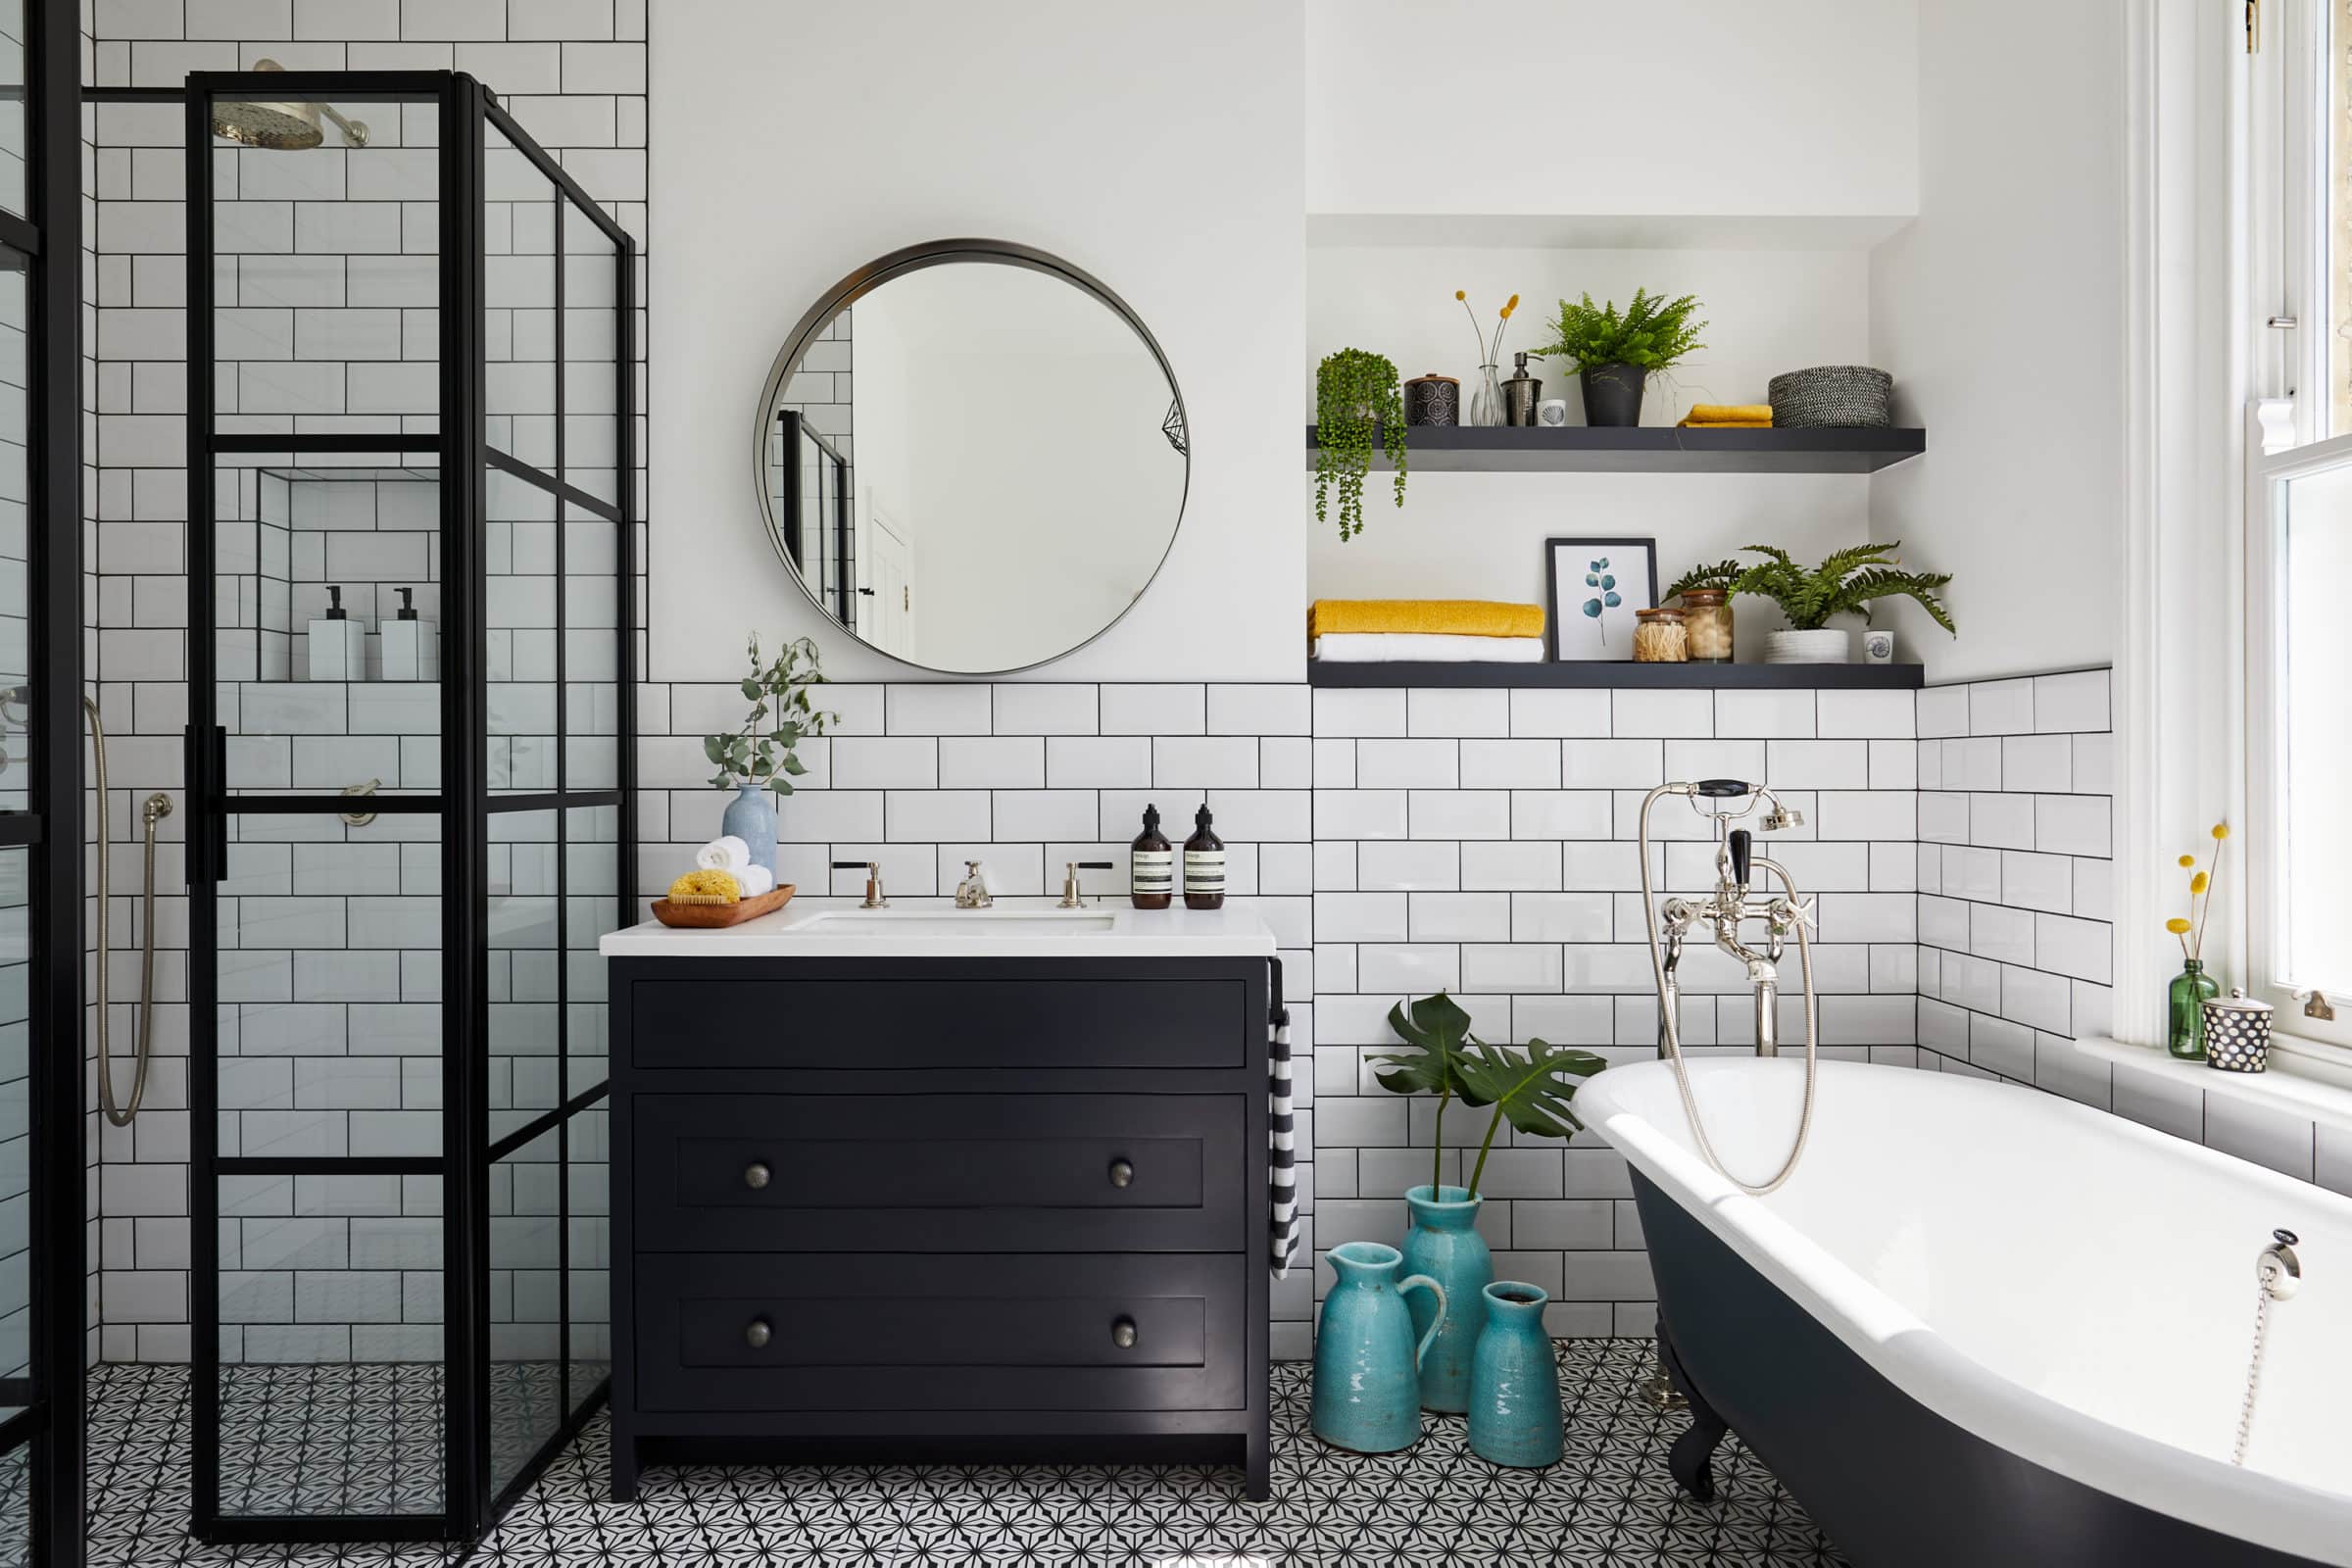 What Should You Not Do When Remodeling a Bathroom